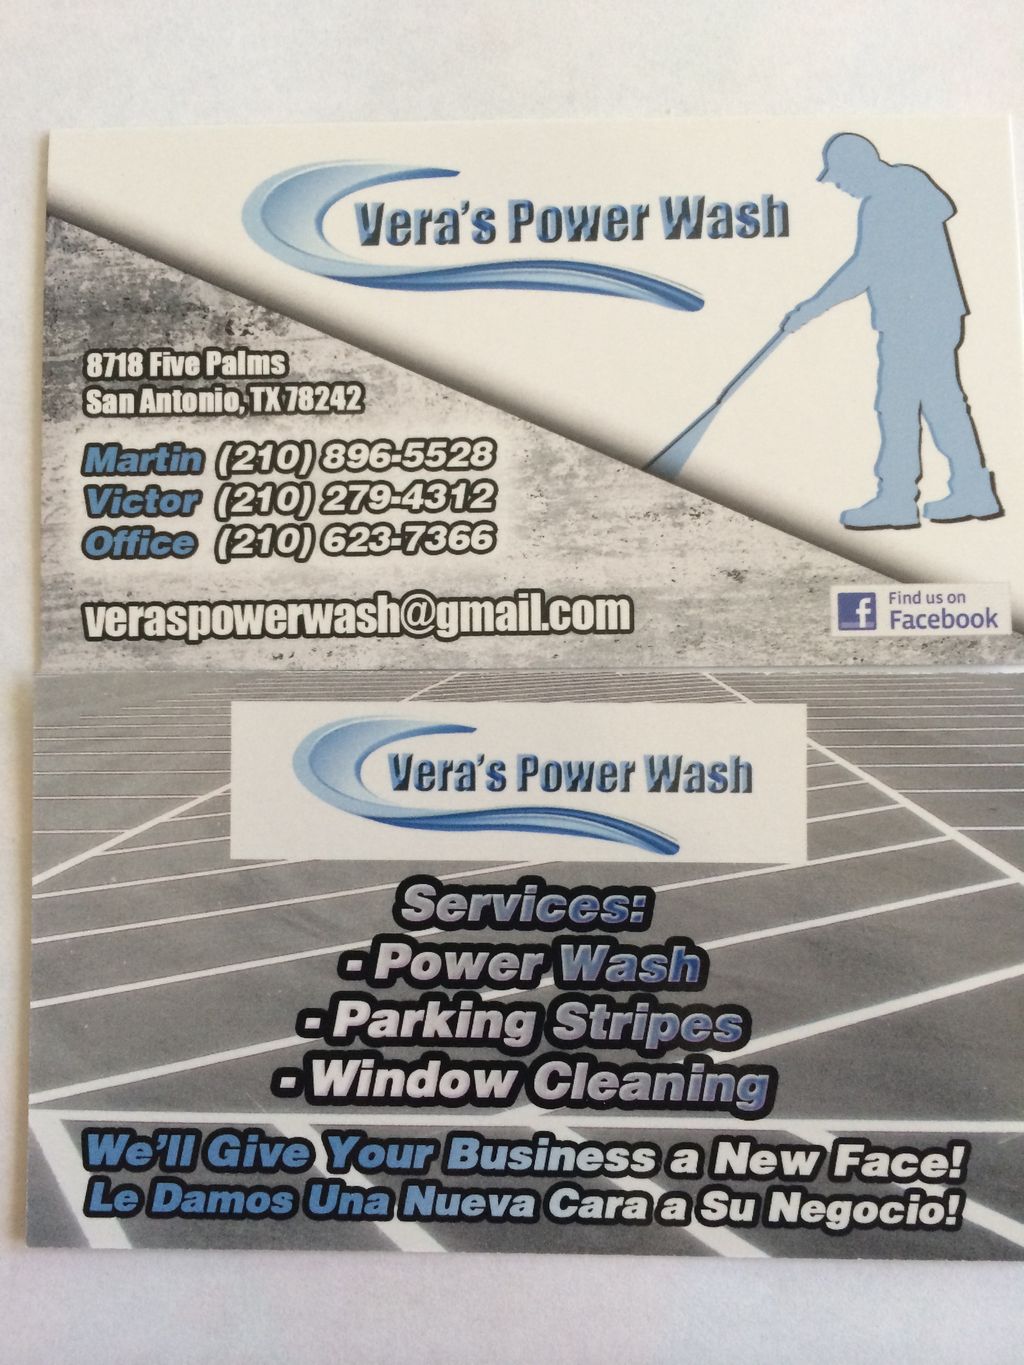 Vera's Power Wash & Cleaning